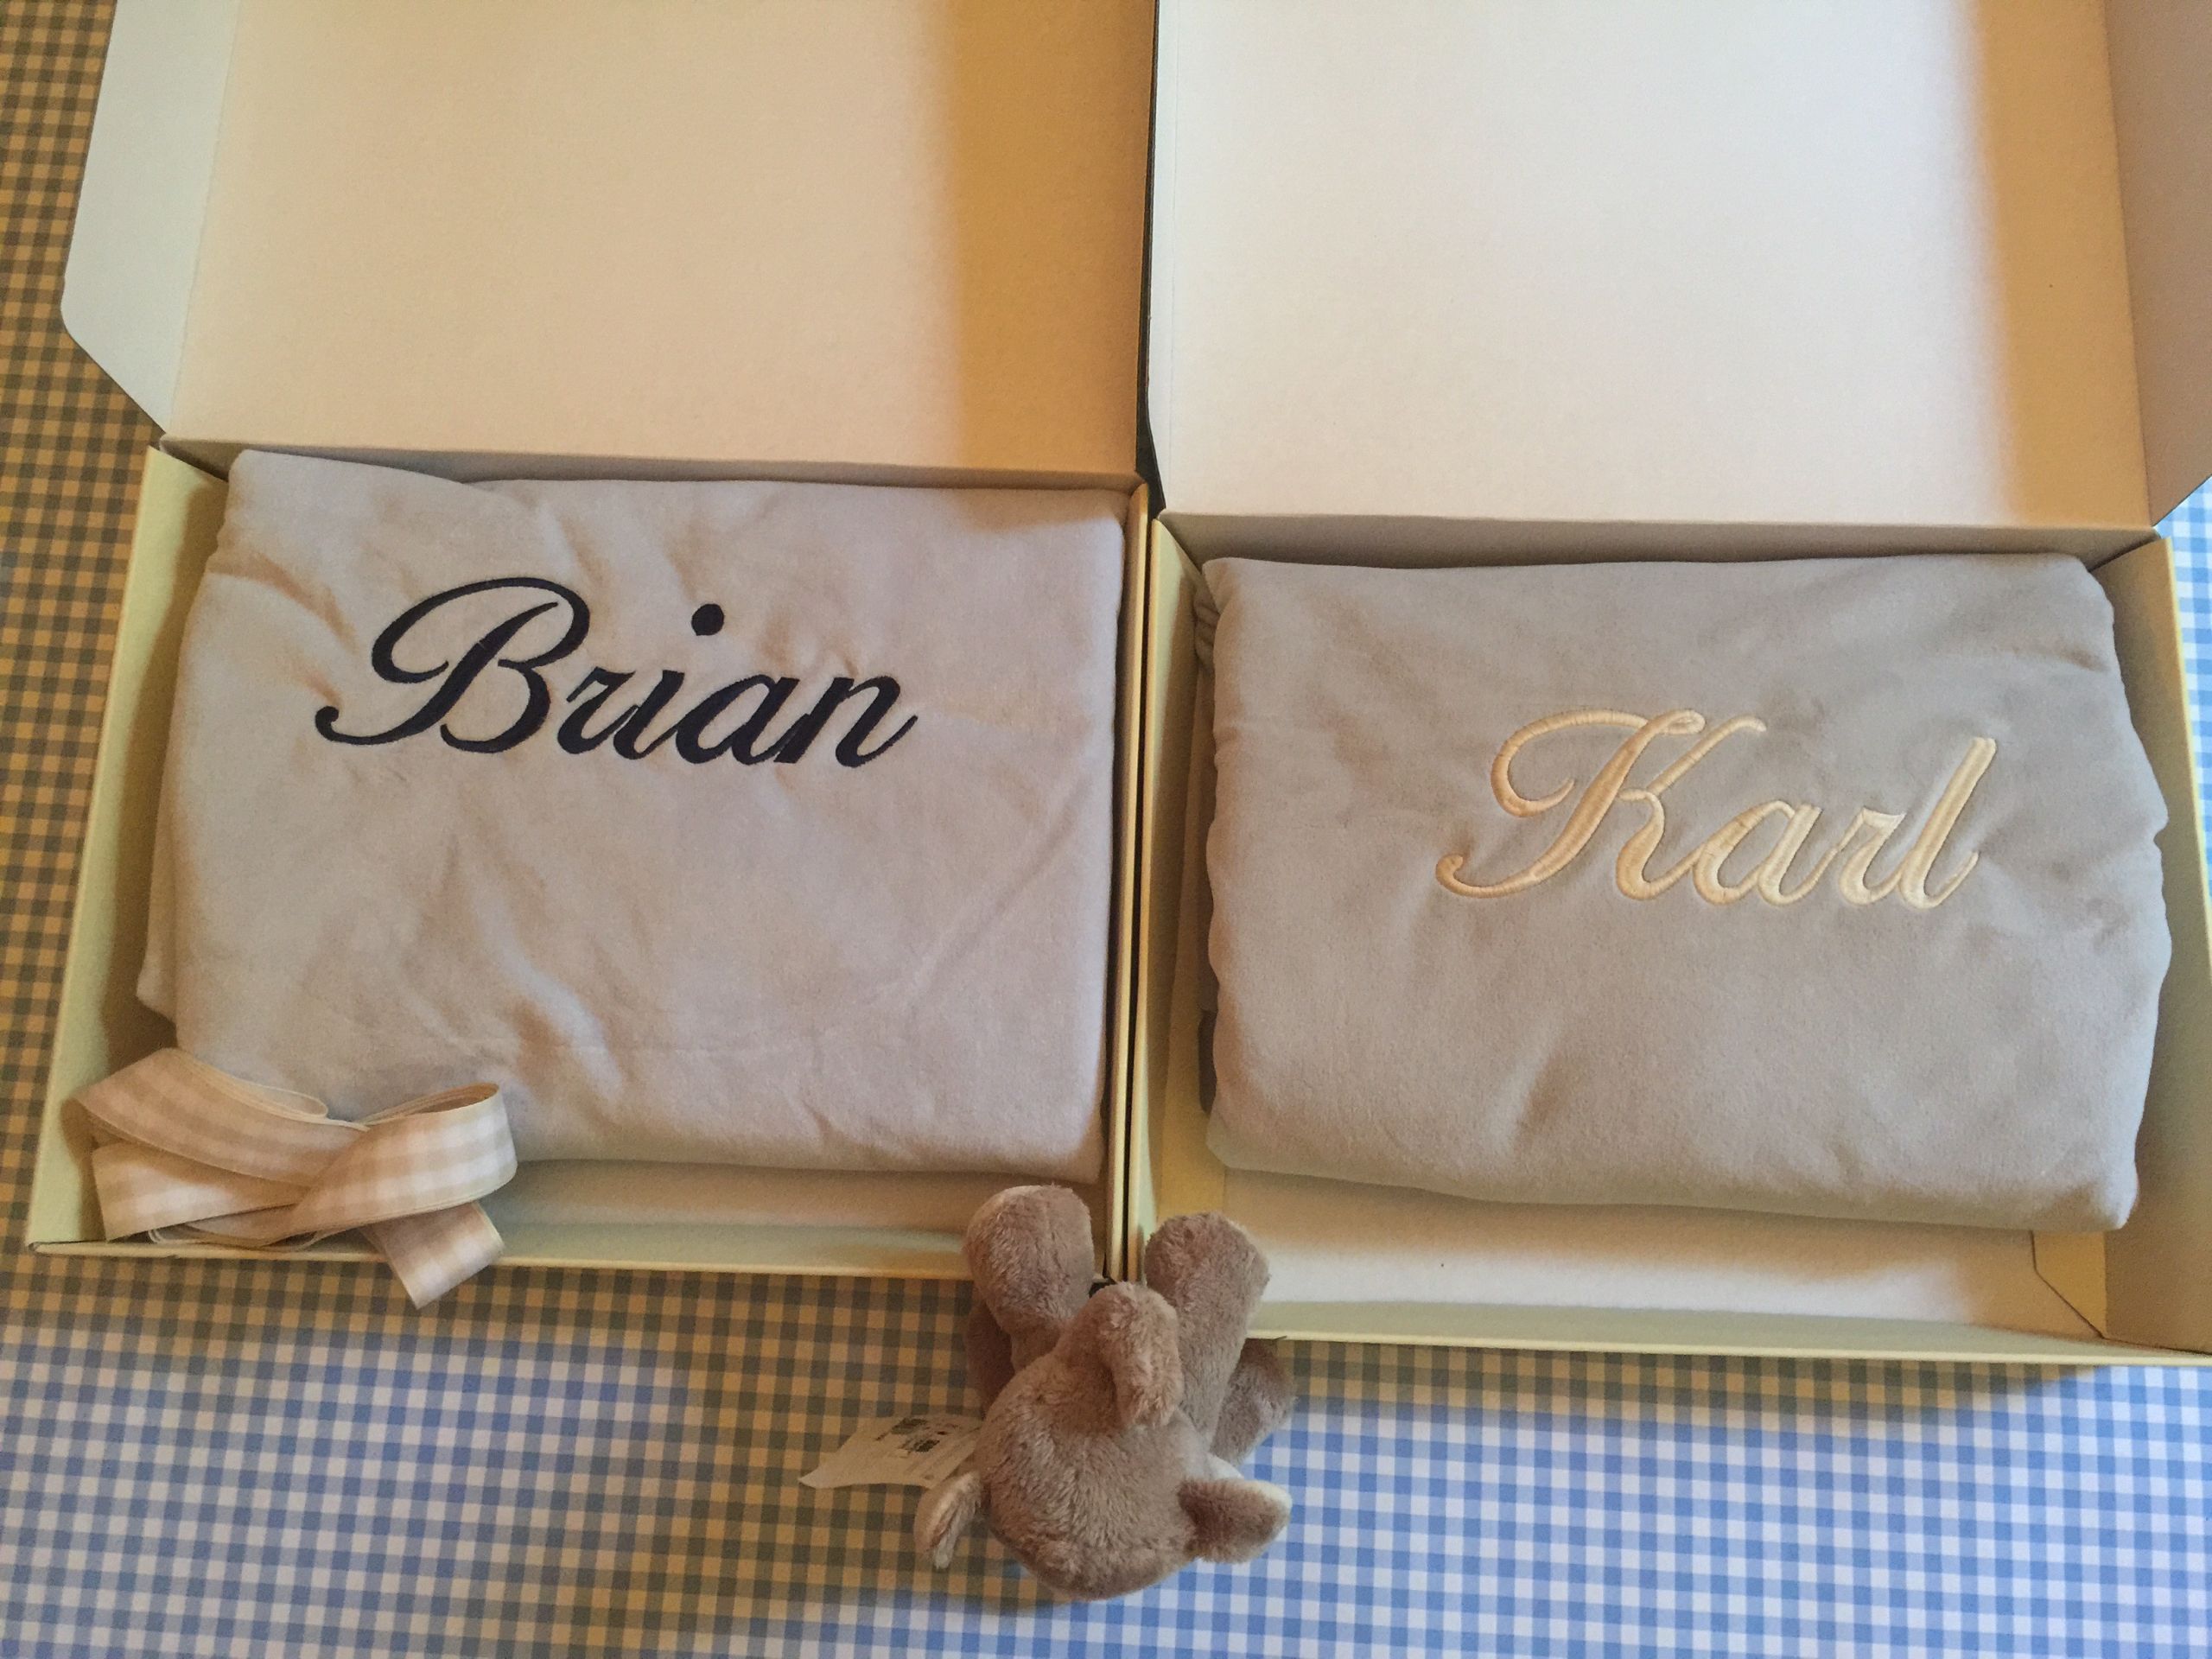 Pottery Barn Kids Gift
 A Unique Baby Gift Idea from Pottery Barn Kids